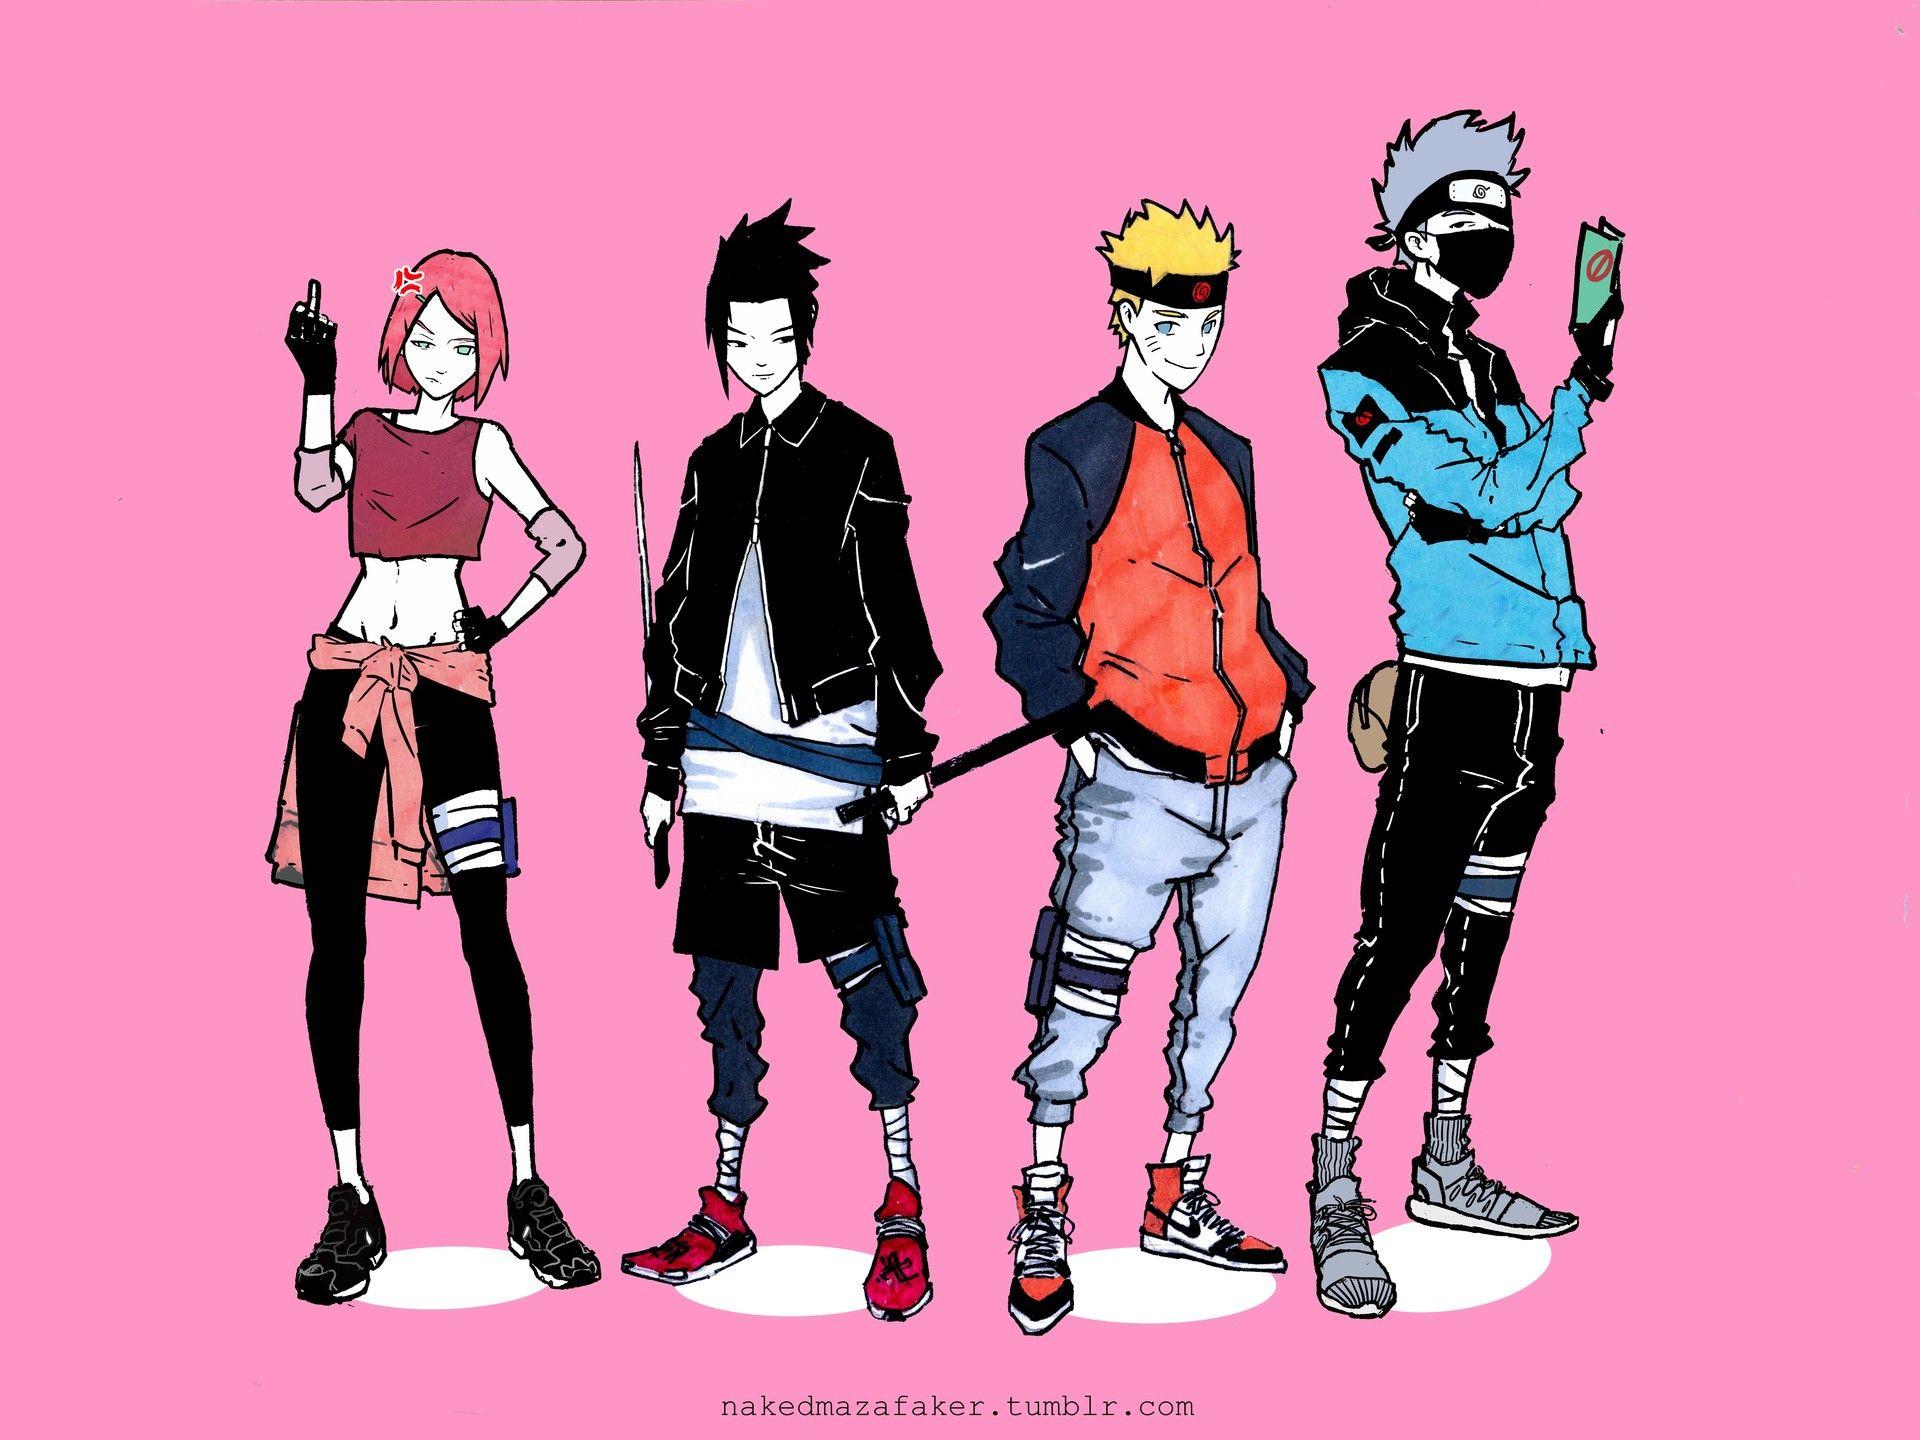 Naruto Supreme Nike Wallpapers Top Free Naruto Supreme Nike Backgrounds Wallpaperaccess Tumblr is a place to express yourself, discover yourself, and bond over the stuff you love. naruto supreme nike wallpapers top